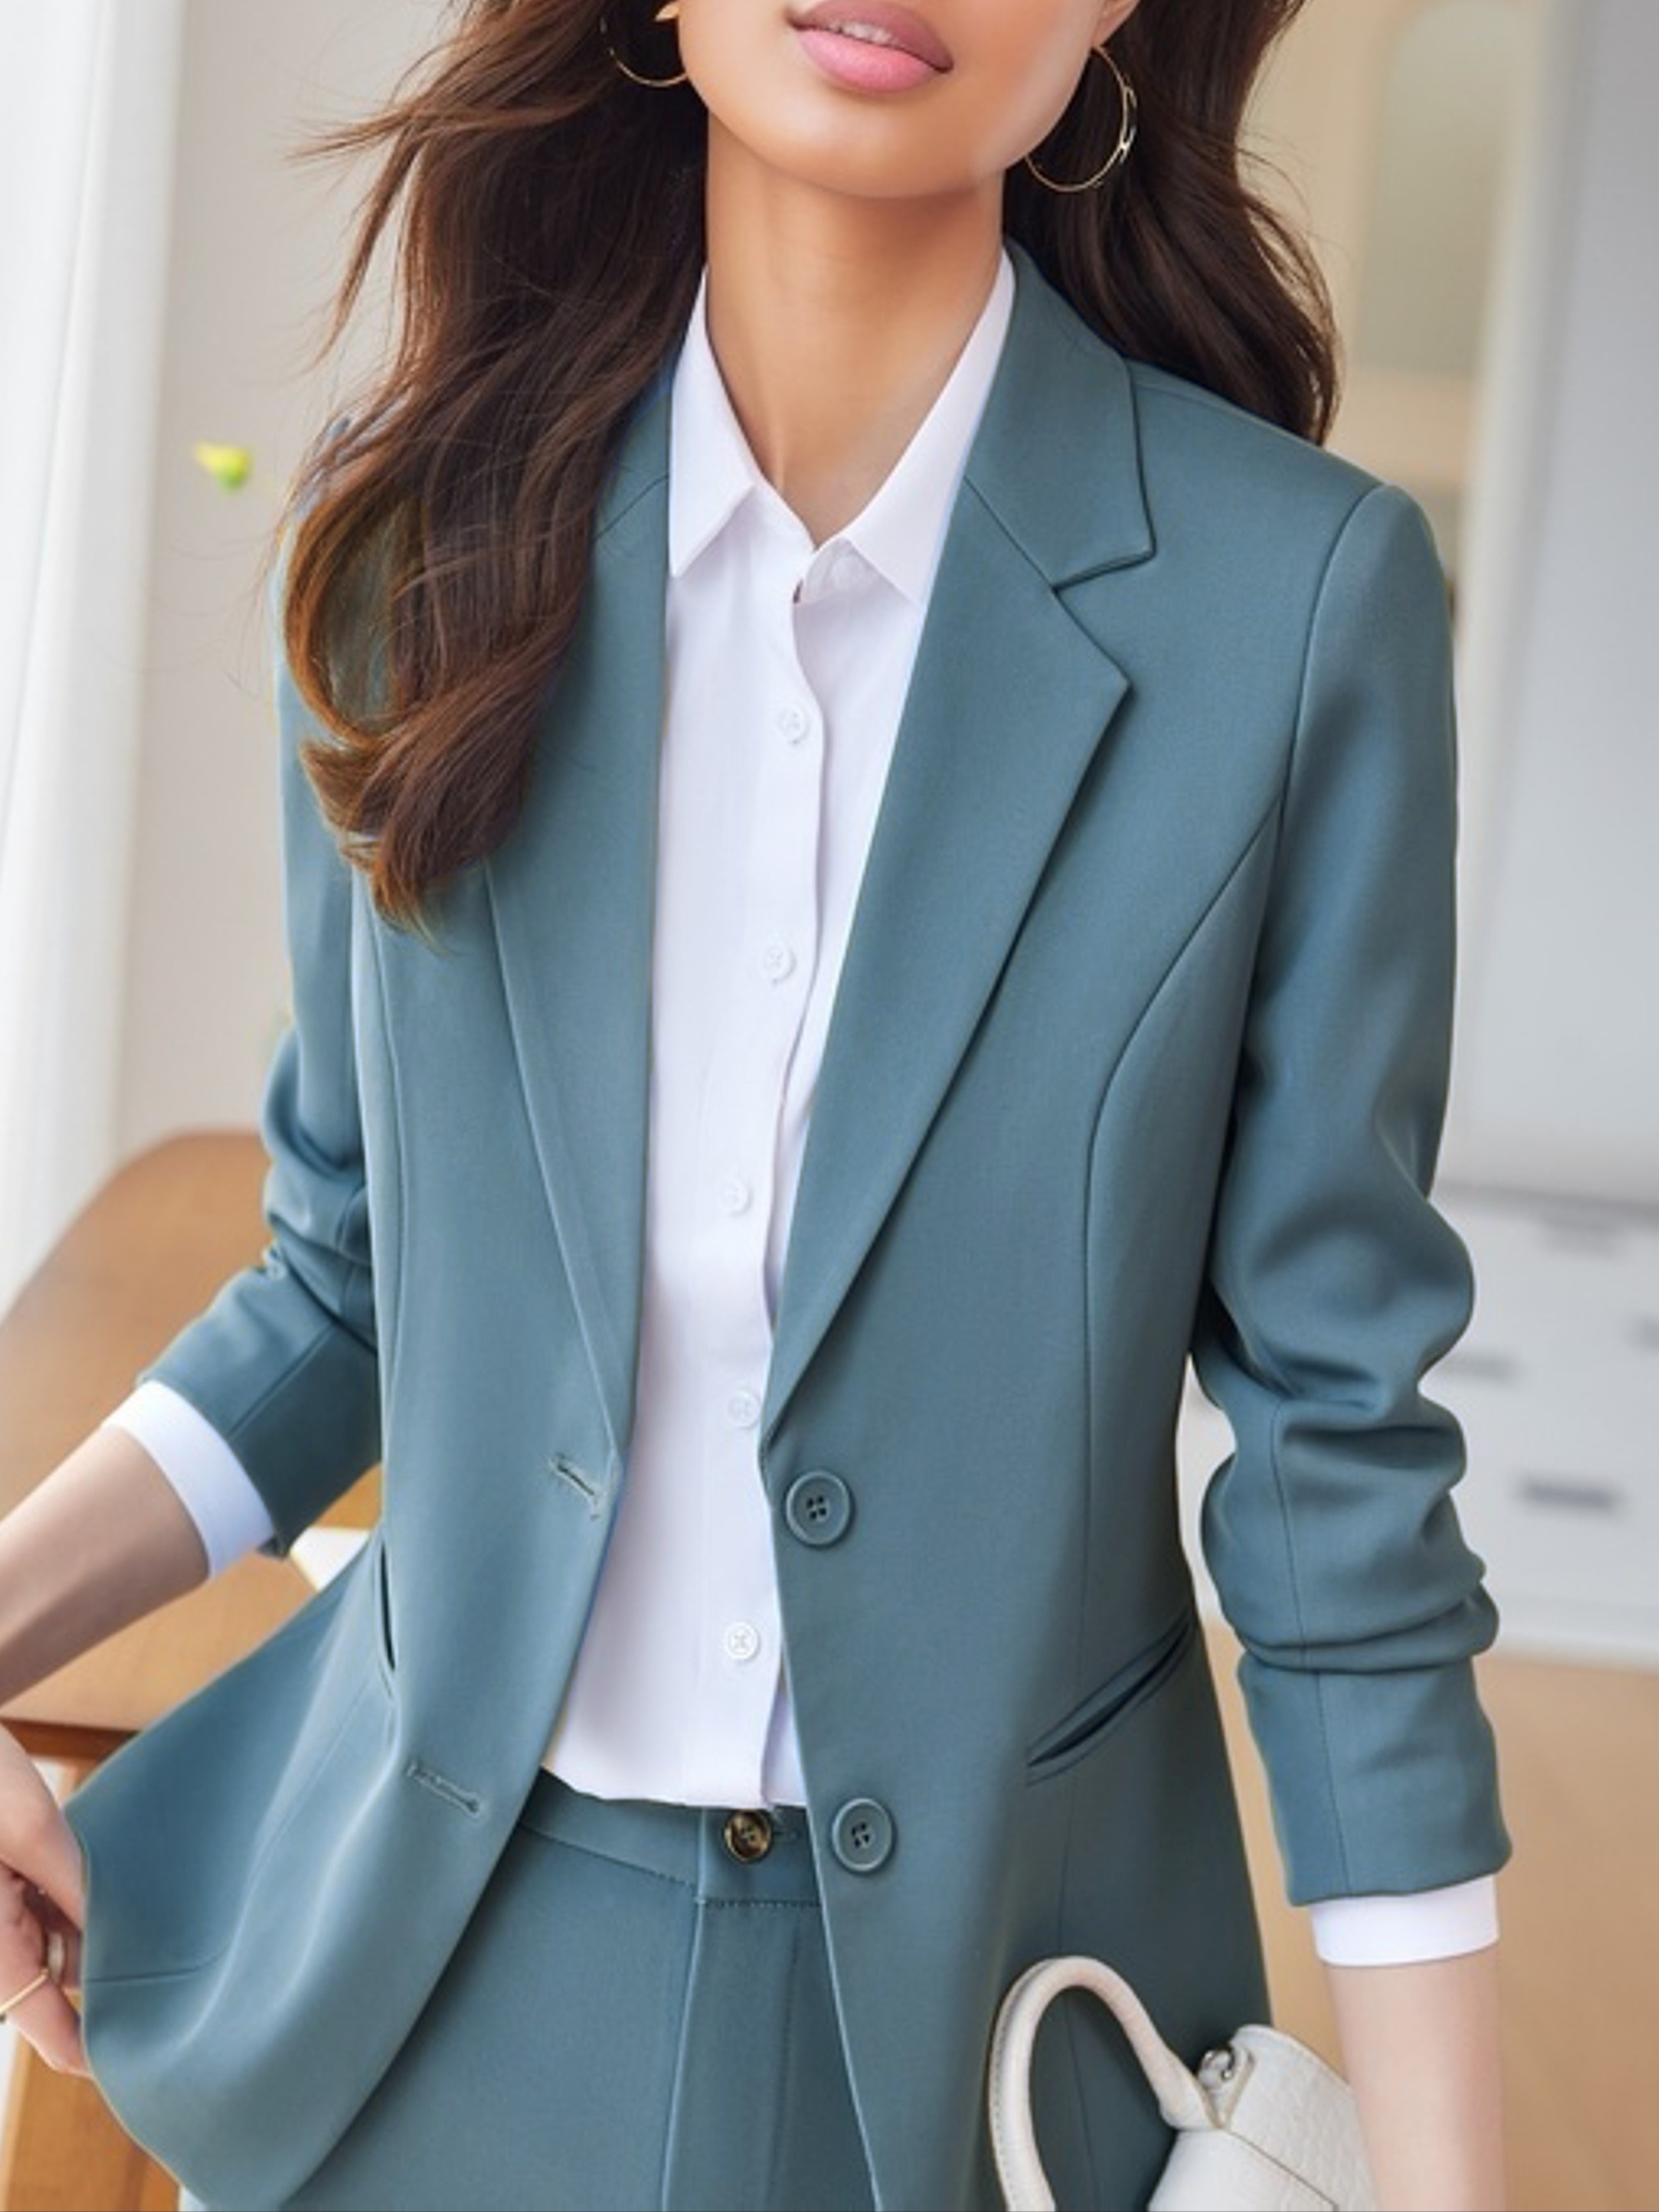 Lapel Button Front Blazer, Elegant Solid Long Sleeve Work Office Outerwear, Women’s Clothing